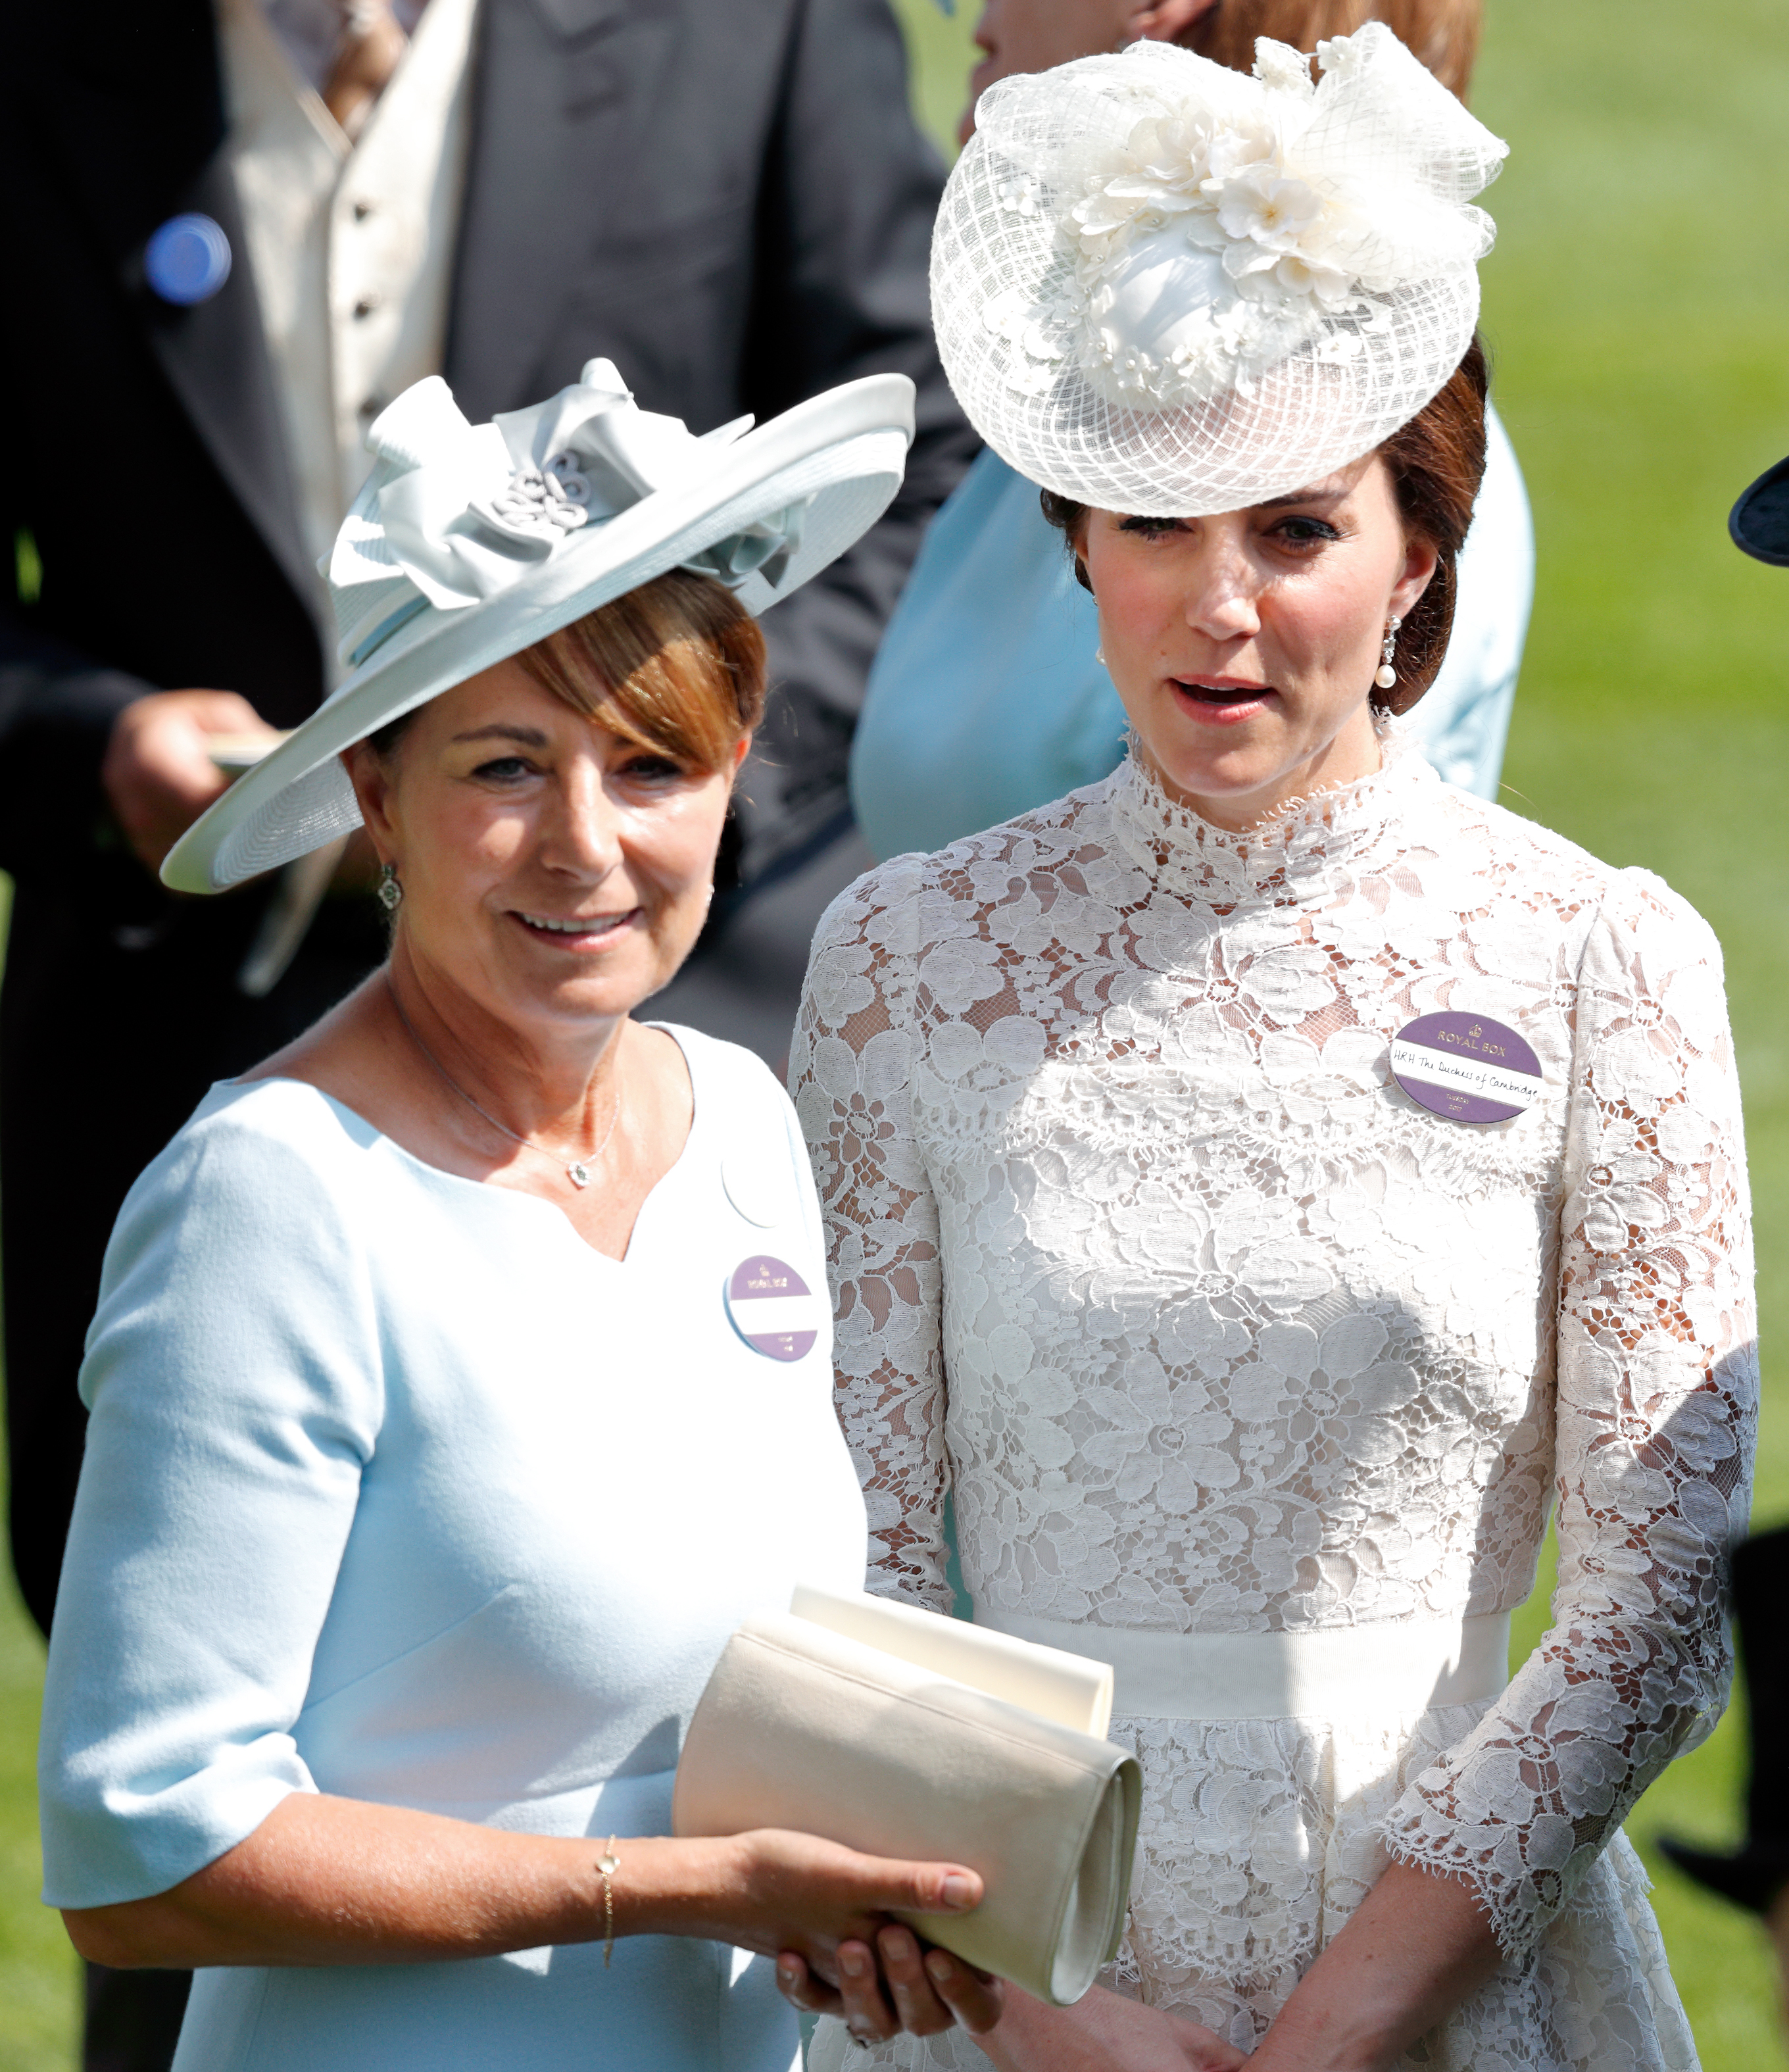 Carole Middleton and Catherine, Duchess of Cambridge attend day 1 of Royal Ascot in Ascot, England, on June 20, 2017. | Source: Getty Images